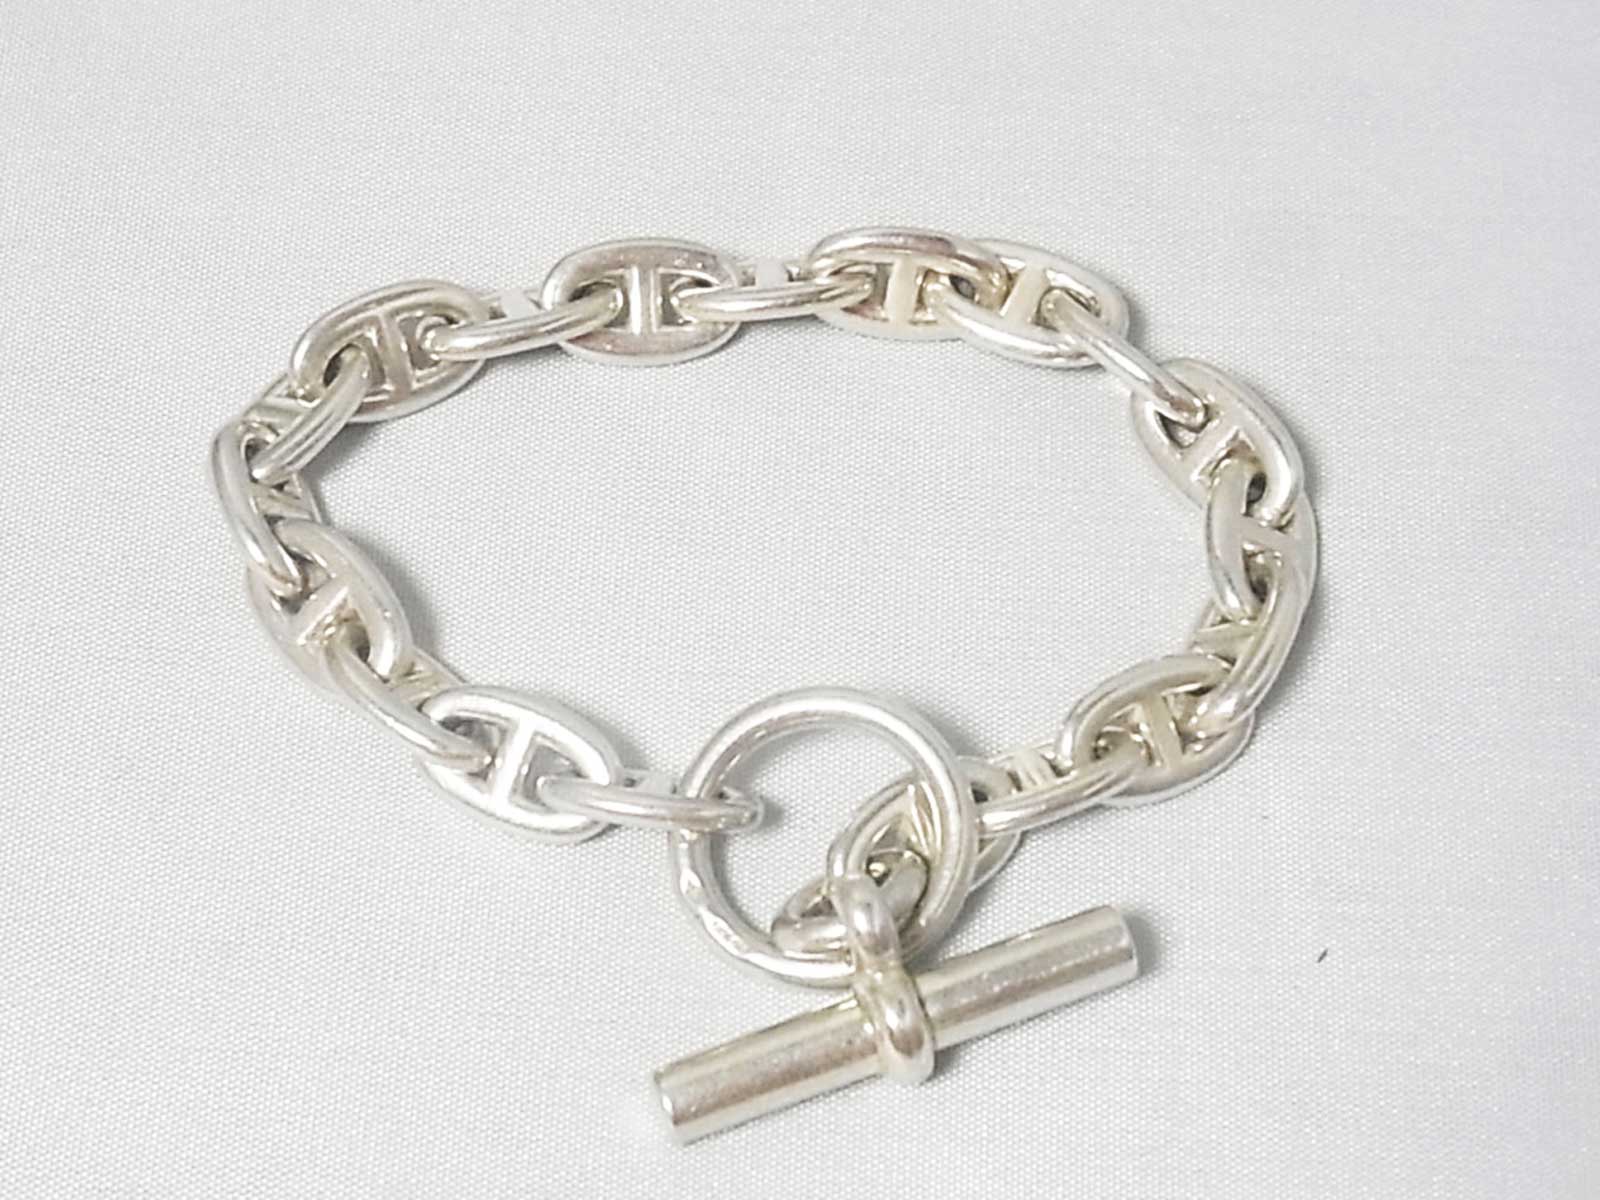 Auth HERMES Chaine D'Ancre 19 Links Toggle Bracelet Sterling Silver 925